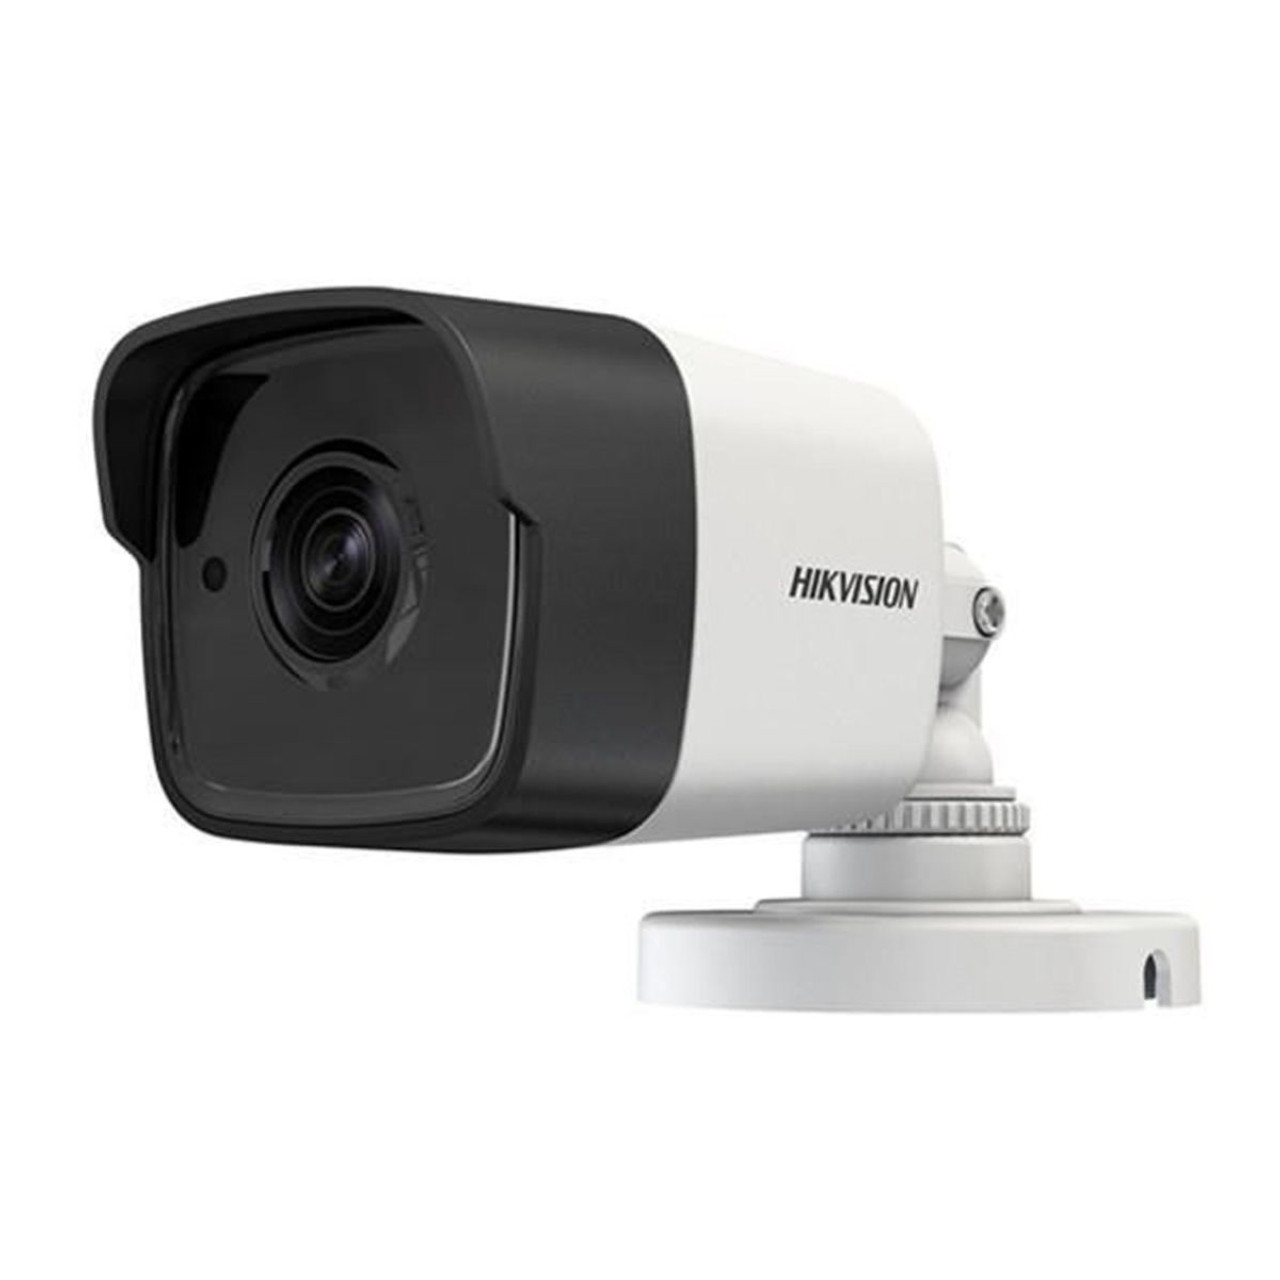 Hikvision® DS-2CE16D8T-IT-3-6MM 1080p HD-TVI Outdoor IR Bullet Camera product image